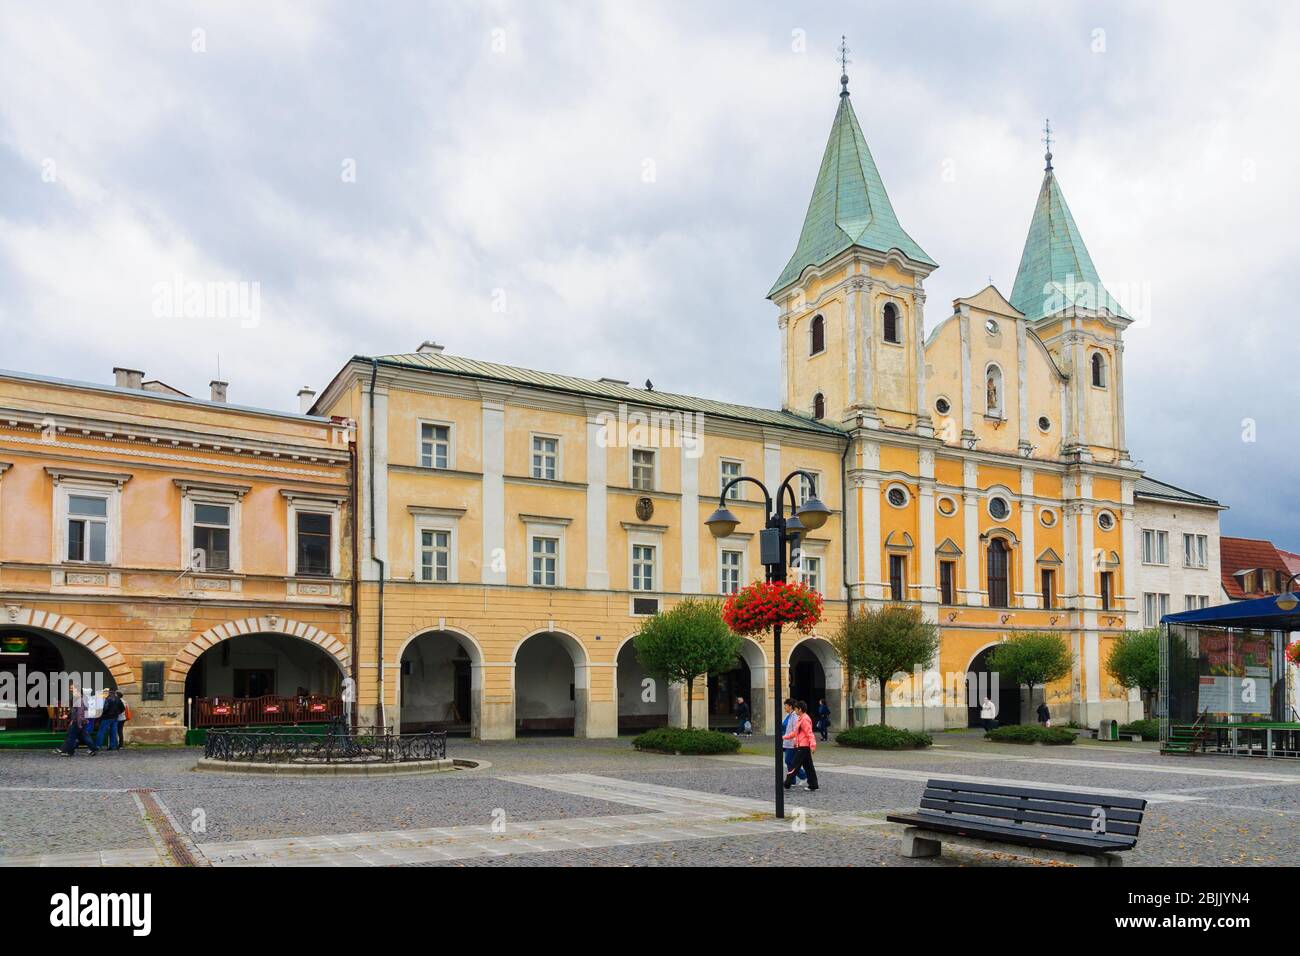 Zilina, Slovakia - September 23, 2013: View of the Conversion of St Paul Church, with town square, locals and visitors, in Zilina, Slovakia Stock Photo